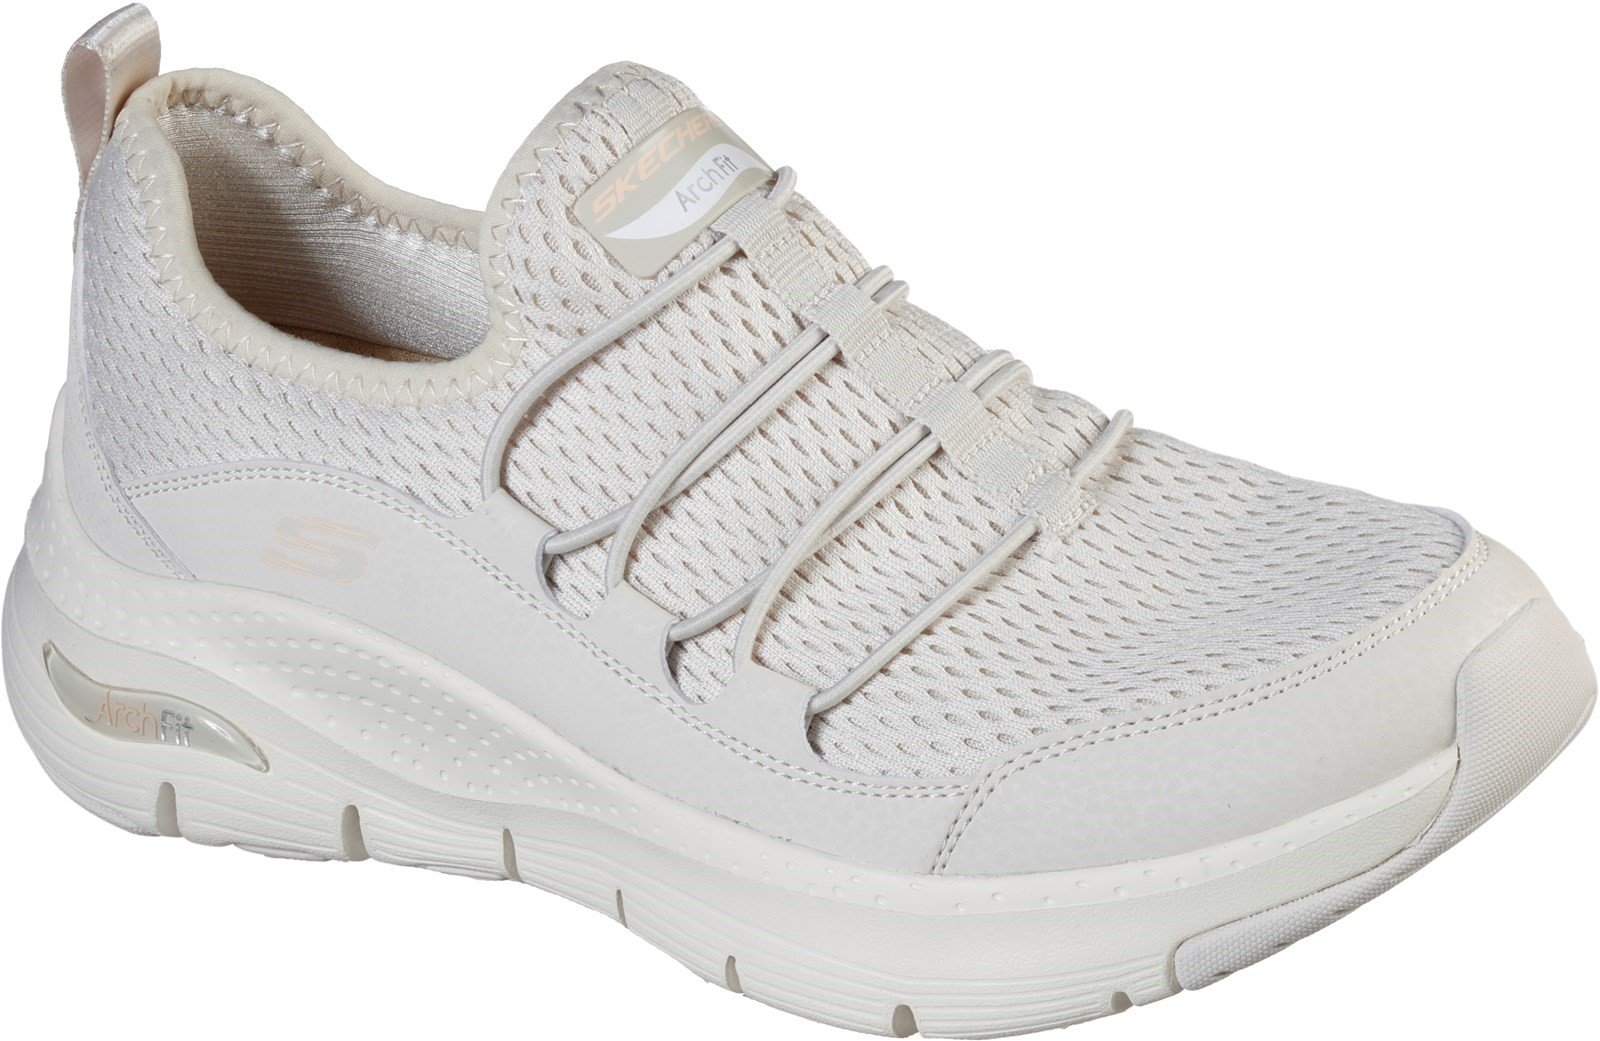 Skechers Women's Arch Fit Lucky Thoughts Sports Trainer Natural 30318 - Natural 3